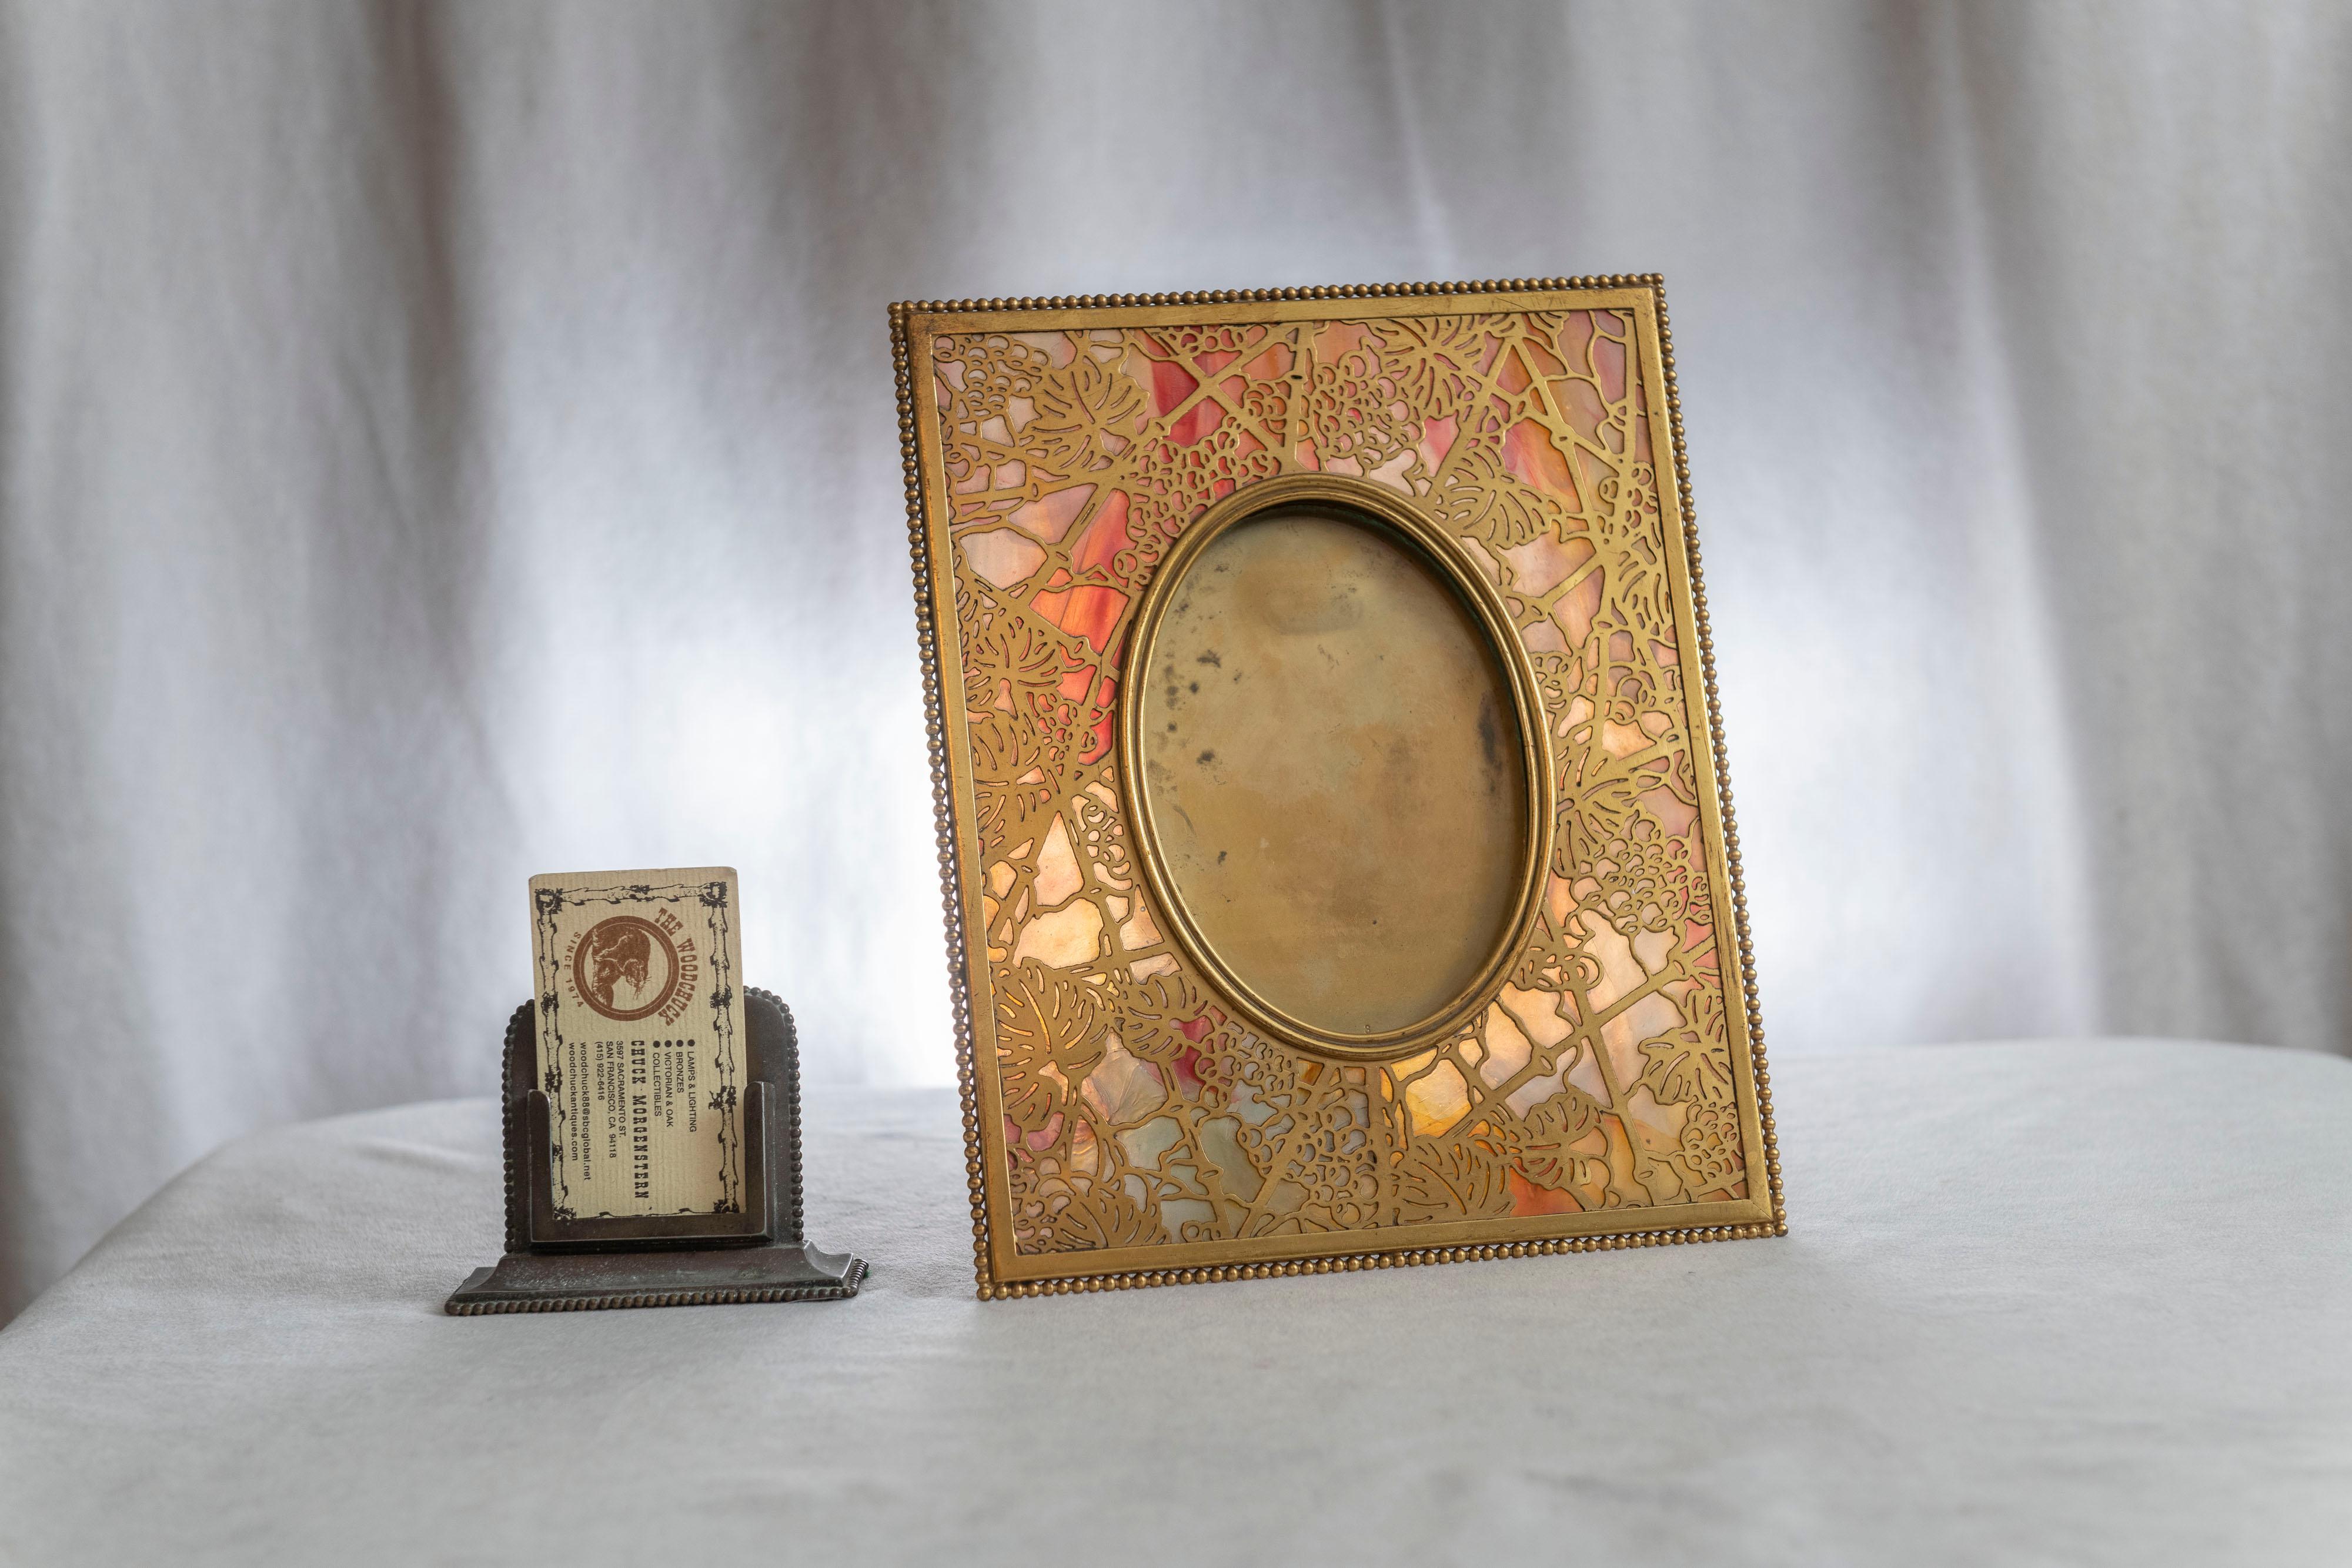 A very fine example of Tiffany Studios workmanship in producing a rich quality picture frame. Using colorful glass as a backdrop and covered in a gilt bronze overlay grapevine pattern. Properly signed on the back and in fine condition.